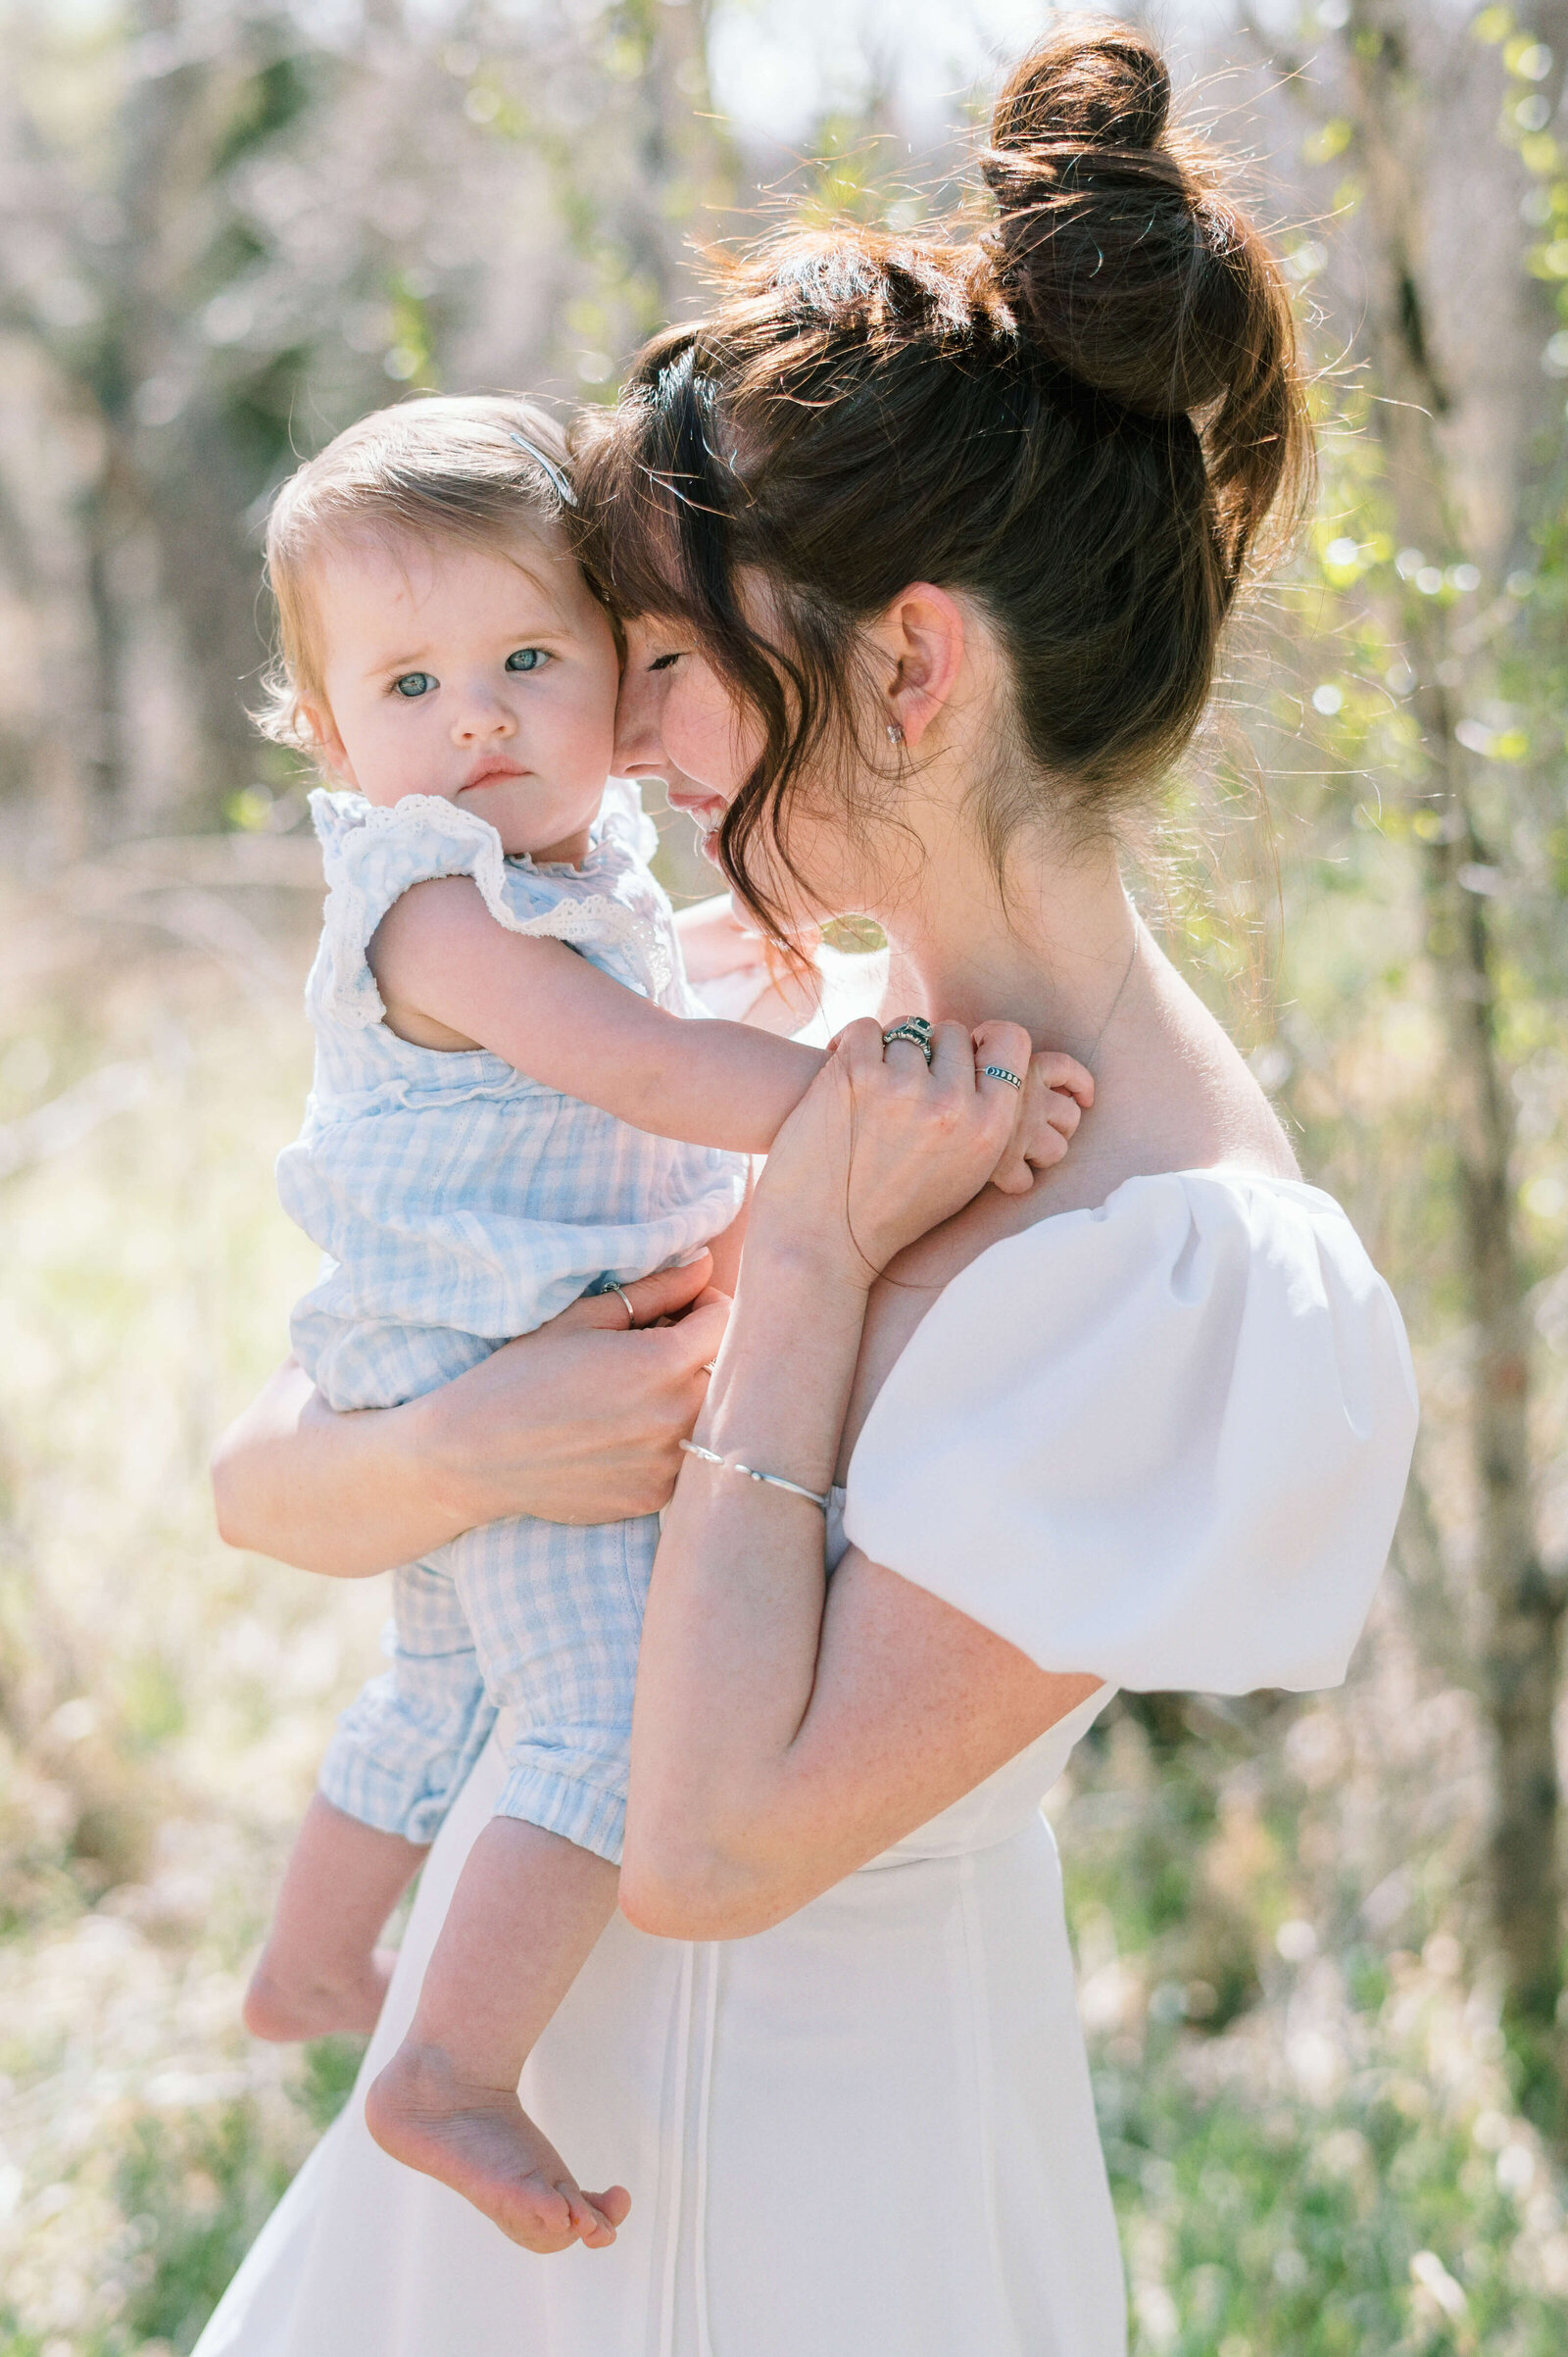 A woman in a white dress hugs her young baby who is dressed in a light blue outfit